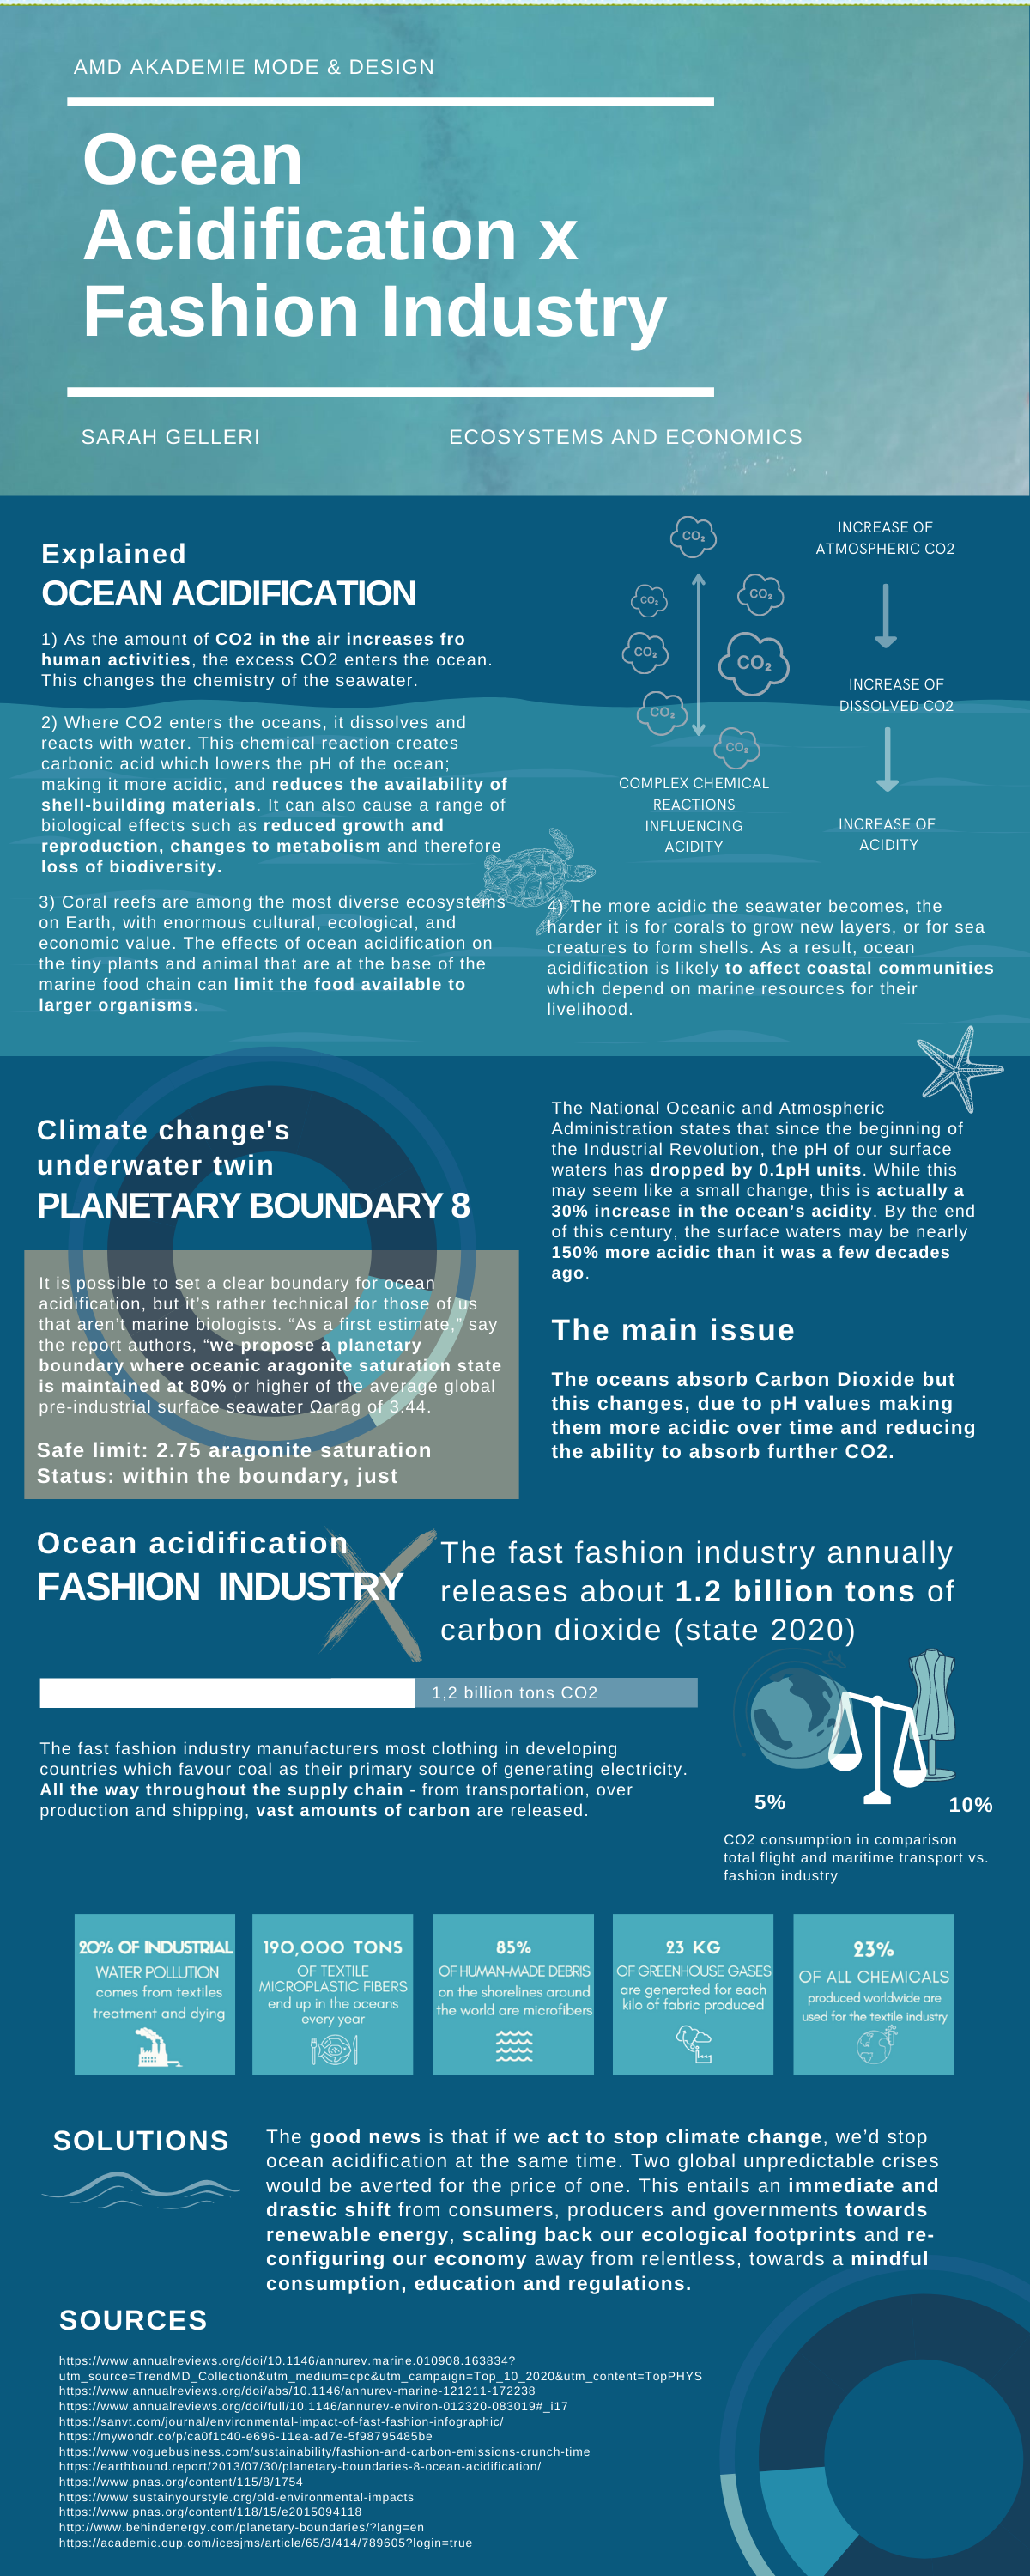 ocean acidification and the fashion industry